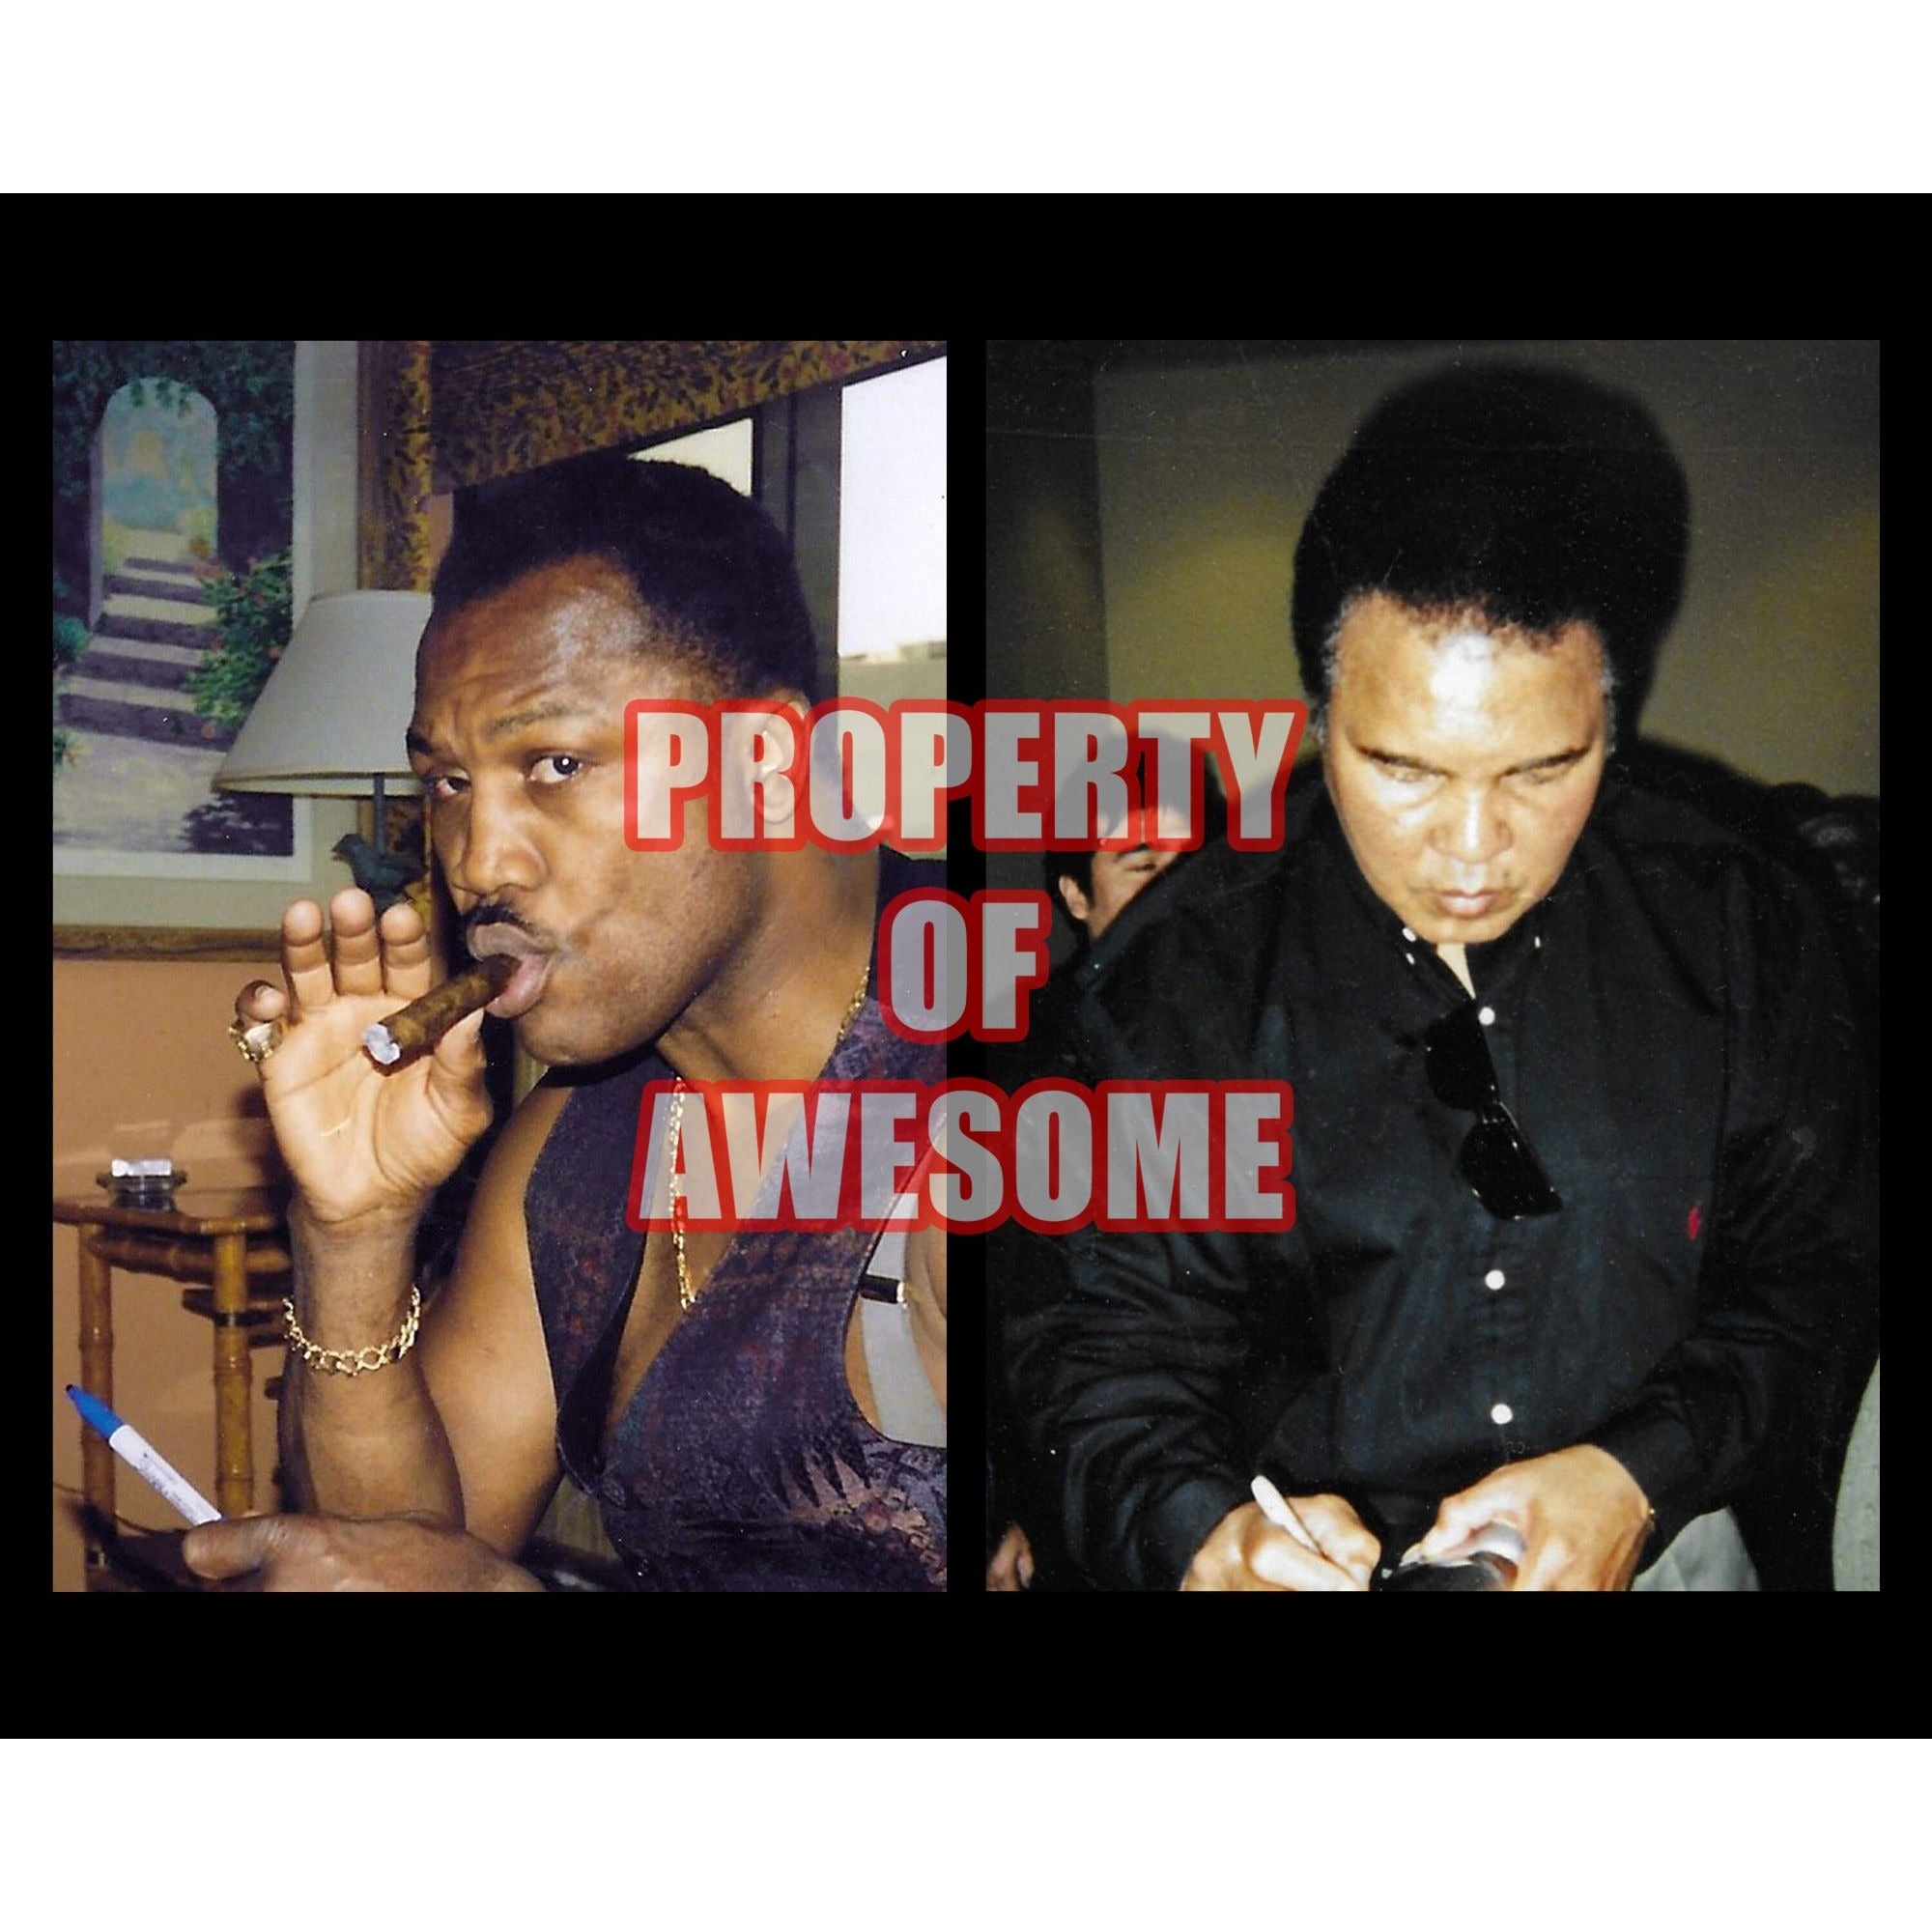 Joe Frazier and Muhammad Ali 11 by 14 photo signed with proof